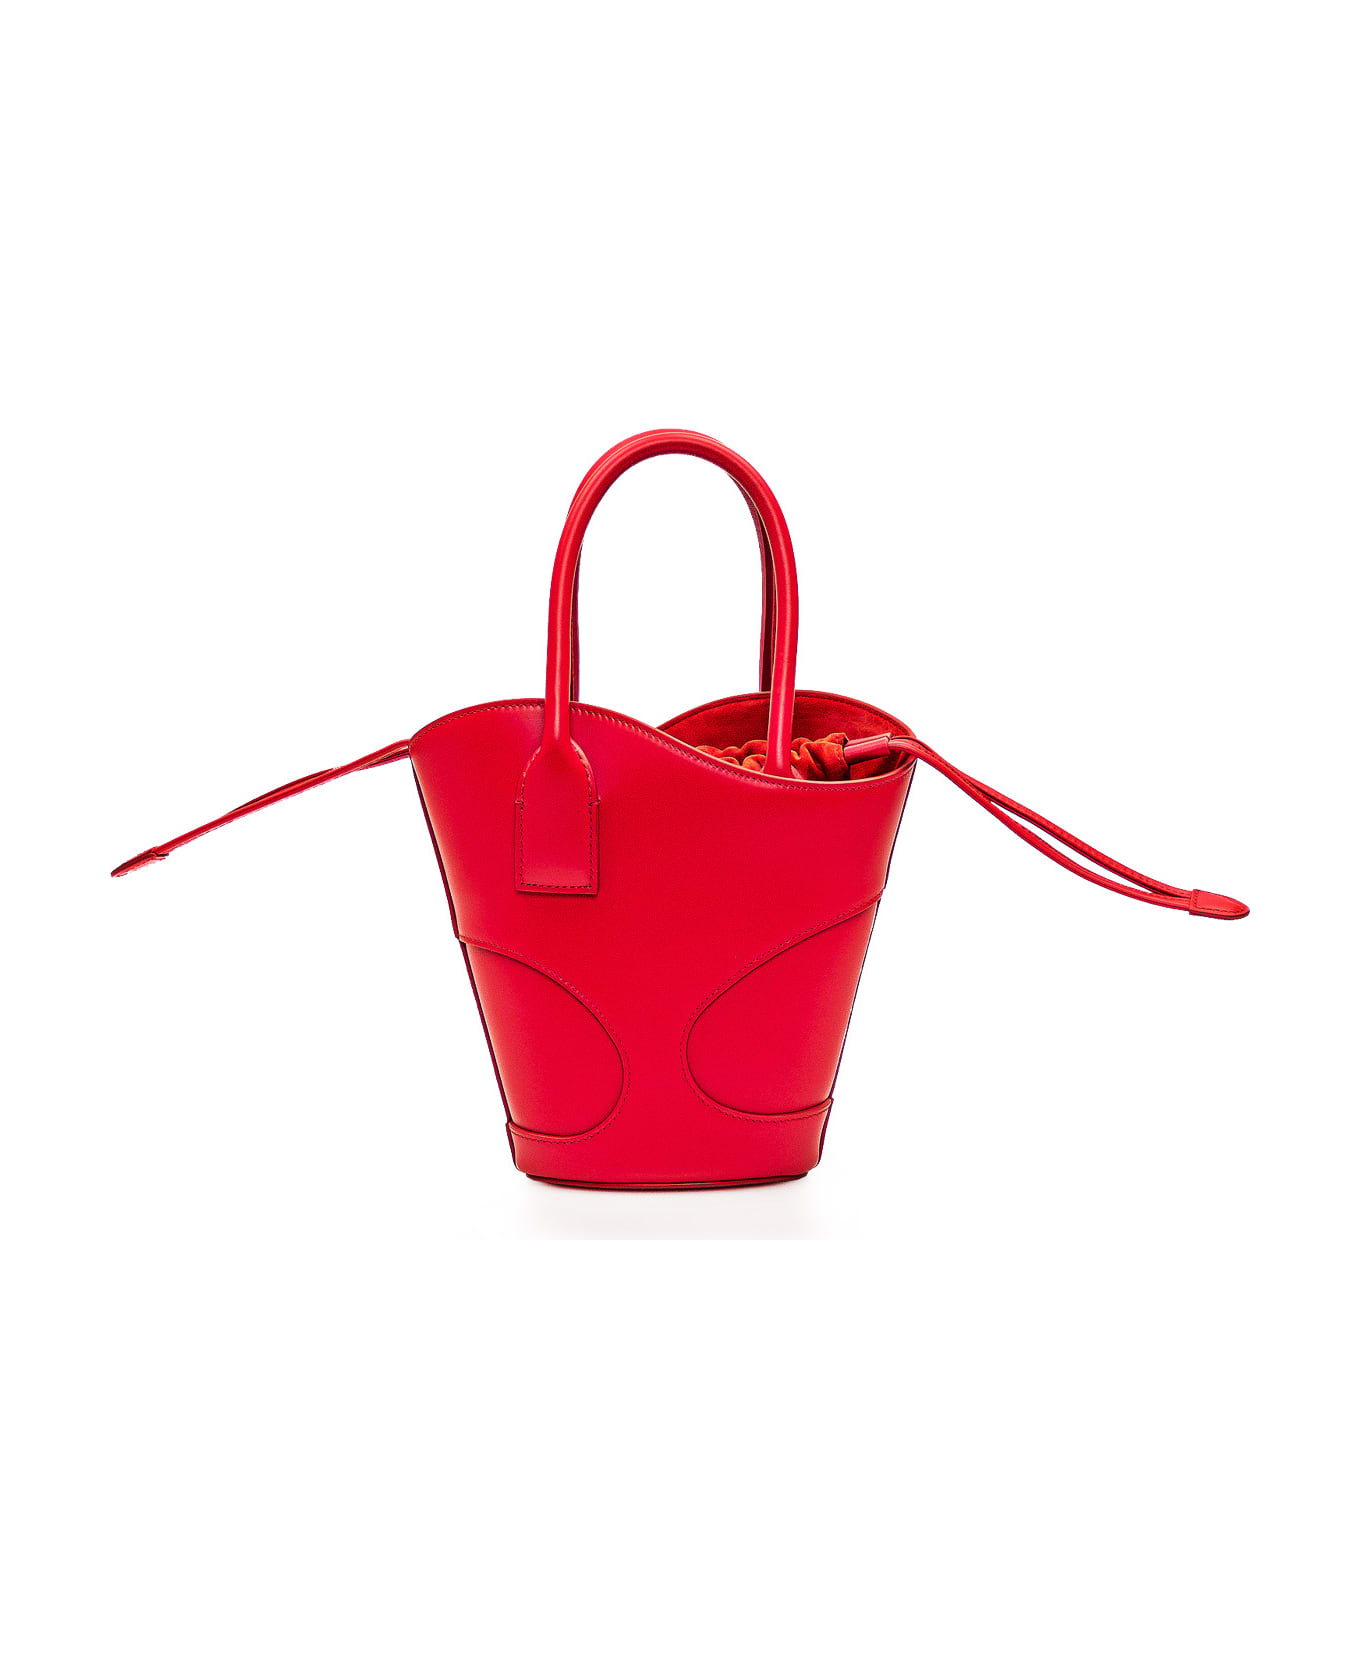 Ferragamo Tote Bag With Cut Out (s) - FLAME RED トートバッグ